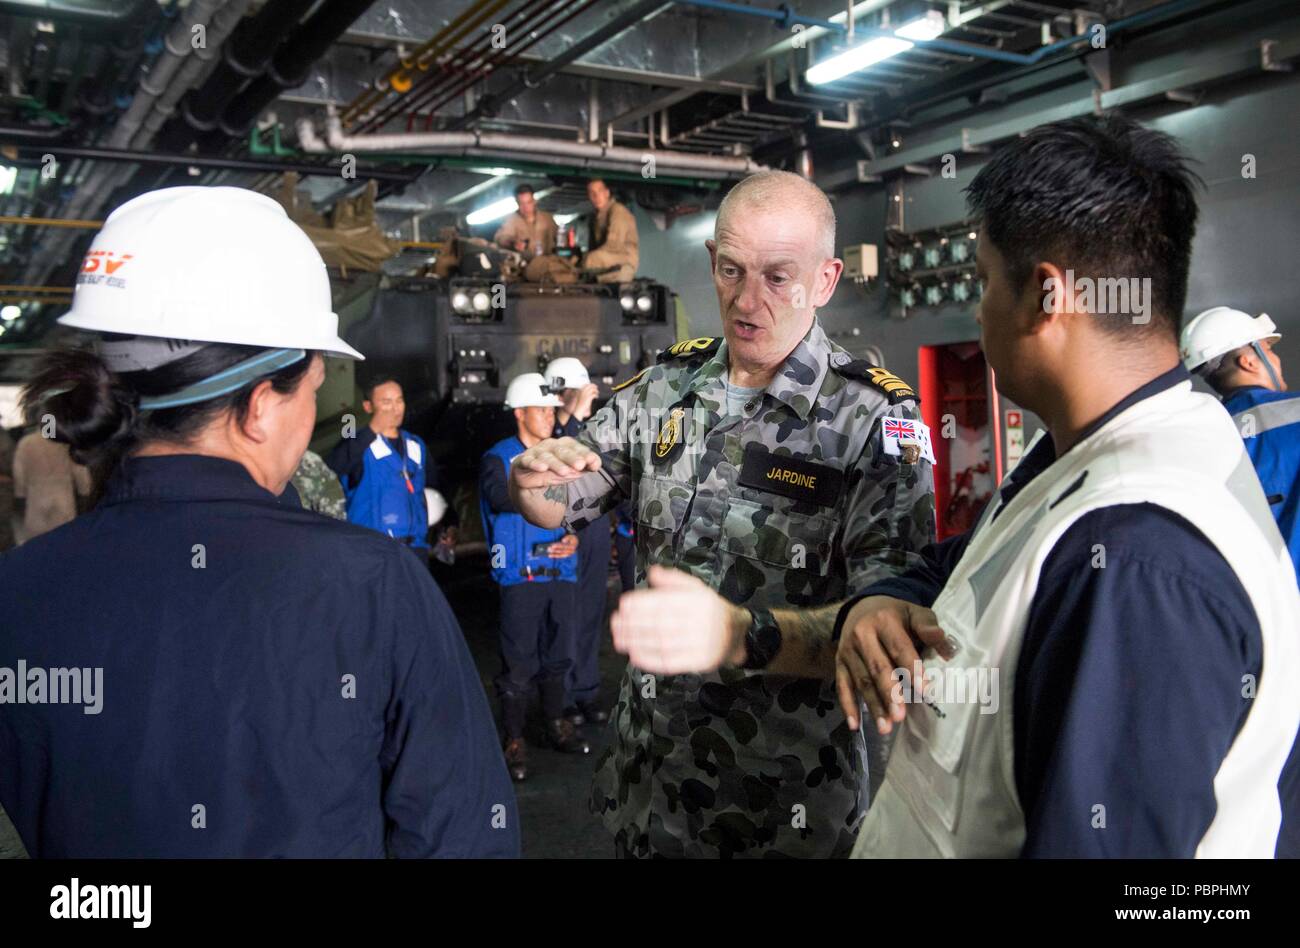 180723-N-VR594-1126 AT SEA (July 23, 2018) Royal Australian Navy Lieutenant Commander Gordon Jardine, assigned to Royal Australian Navy landing helicopter dock ship HMAS Adelaide (L01), speaks with Philippine Navy sailors after boarding assault amphibious vehicles (AAV) in the well deck of the Philippine Navy landing platform dock BRP Davao Del Sur (LD 602) during the Rim of the Pacific (RIMPAC) exercise, July 23. This is the first time that Davao Del Sur has conducted operations with U.S. Marine AAVs. Twenty-five nations, 46 ships, five submarines, and about 200 aircraft and 25,000 personnel  Stock Photo